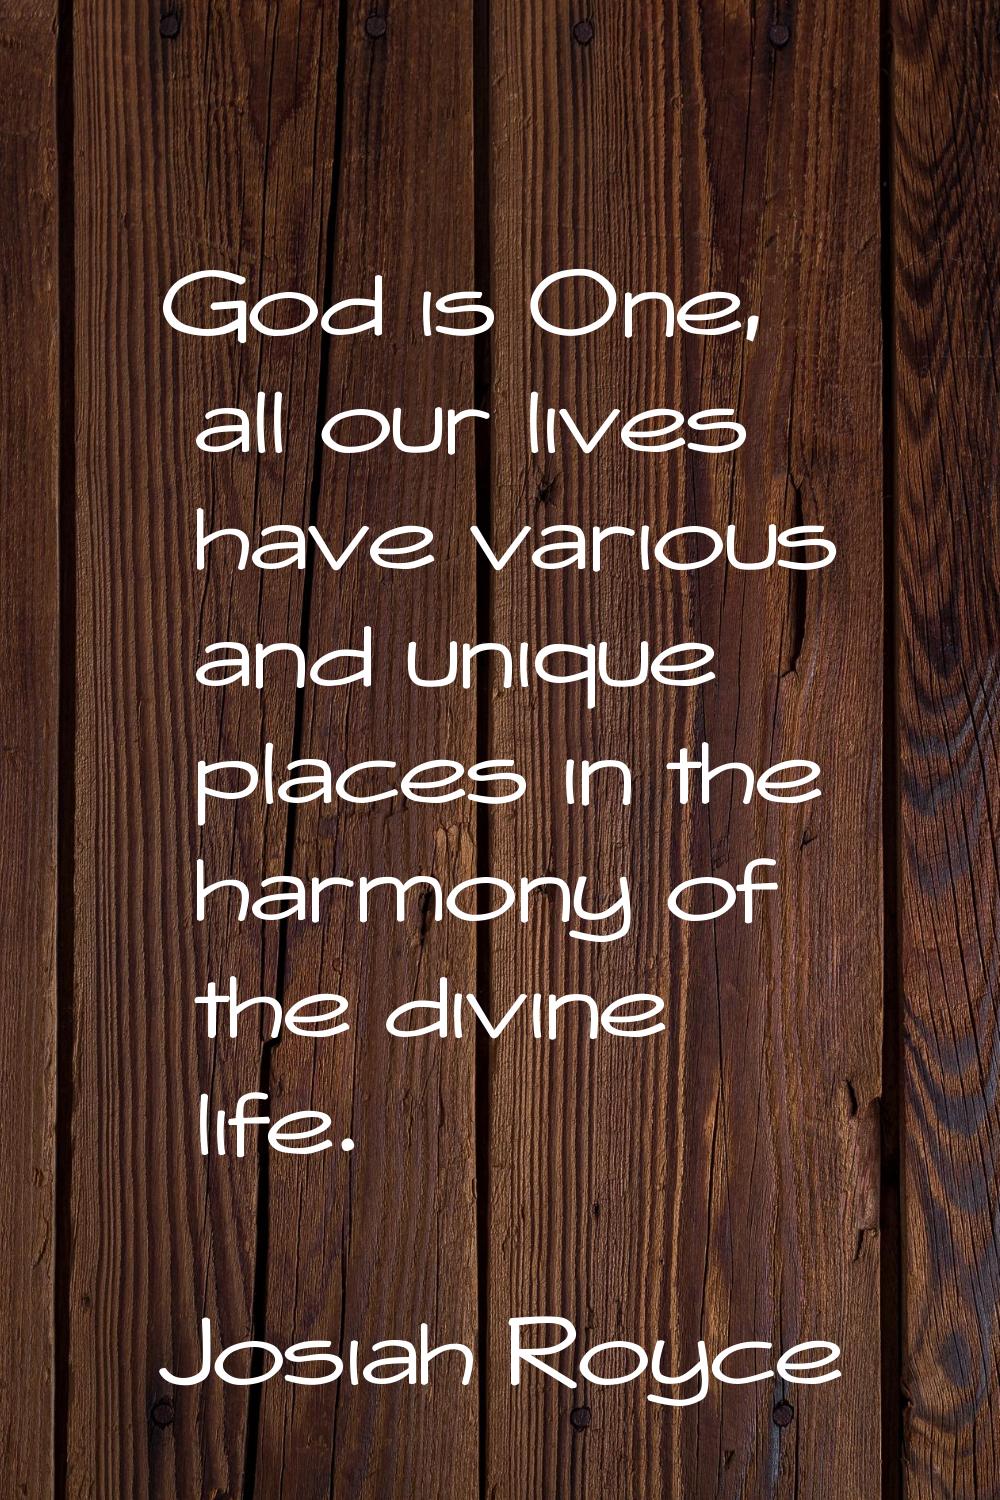 God is One, all our lives have various and unique places in the harmony of the divine life.